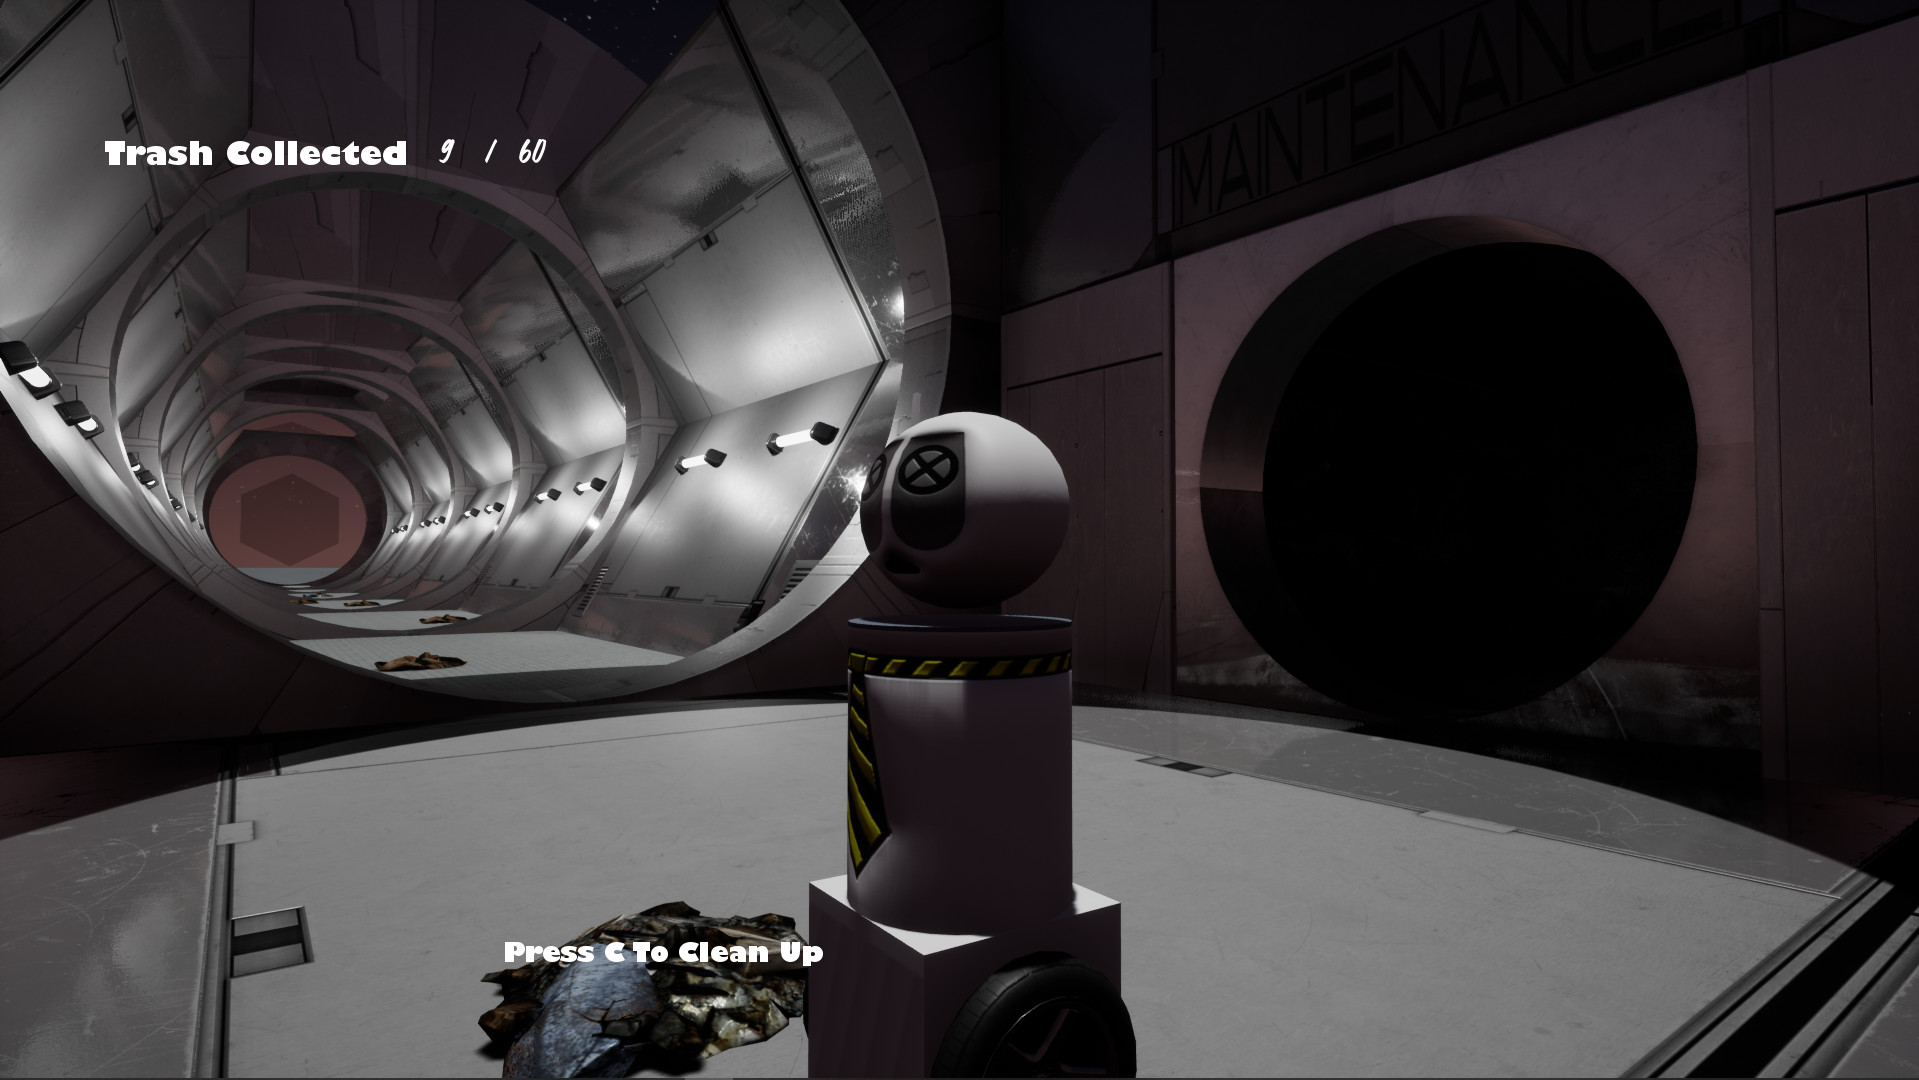 Eugene's Dream: The Daily Ins And Outs Of A Sane Robot In An Insane World Steam CD Key